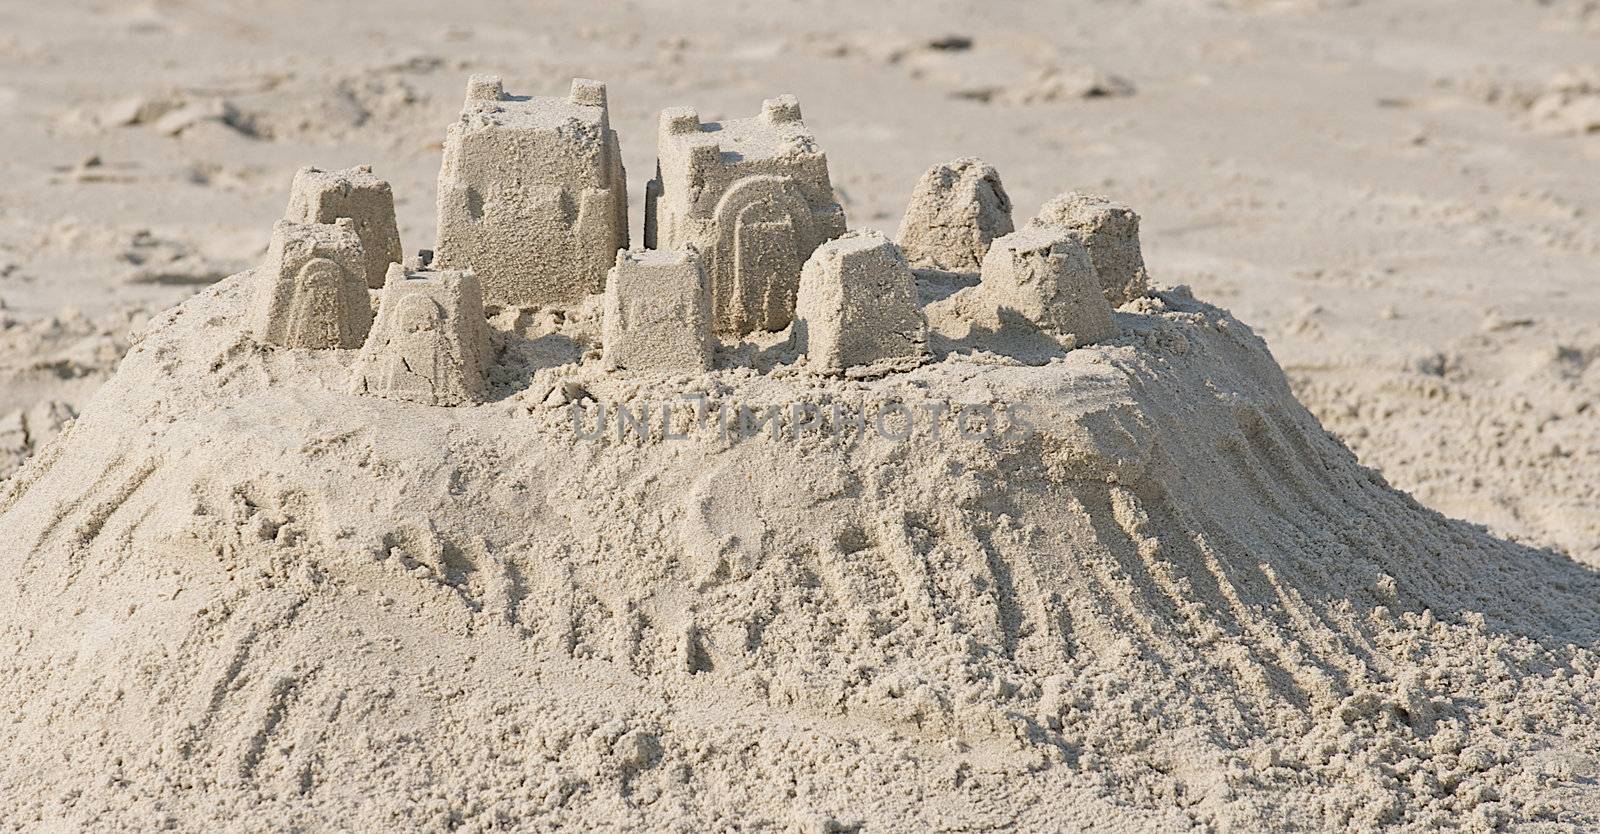 Sand sculpture of a small town created by children at the beach.